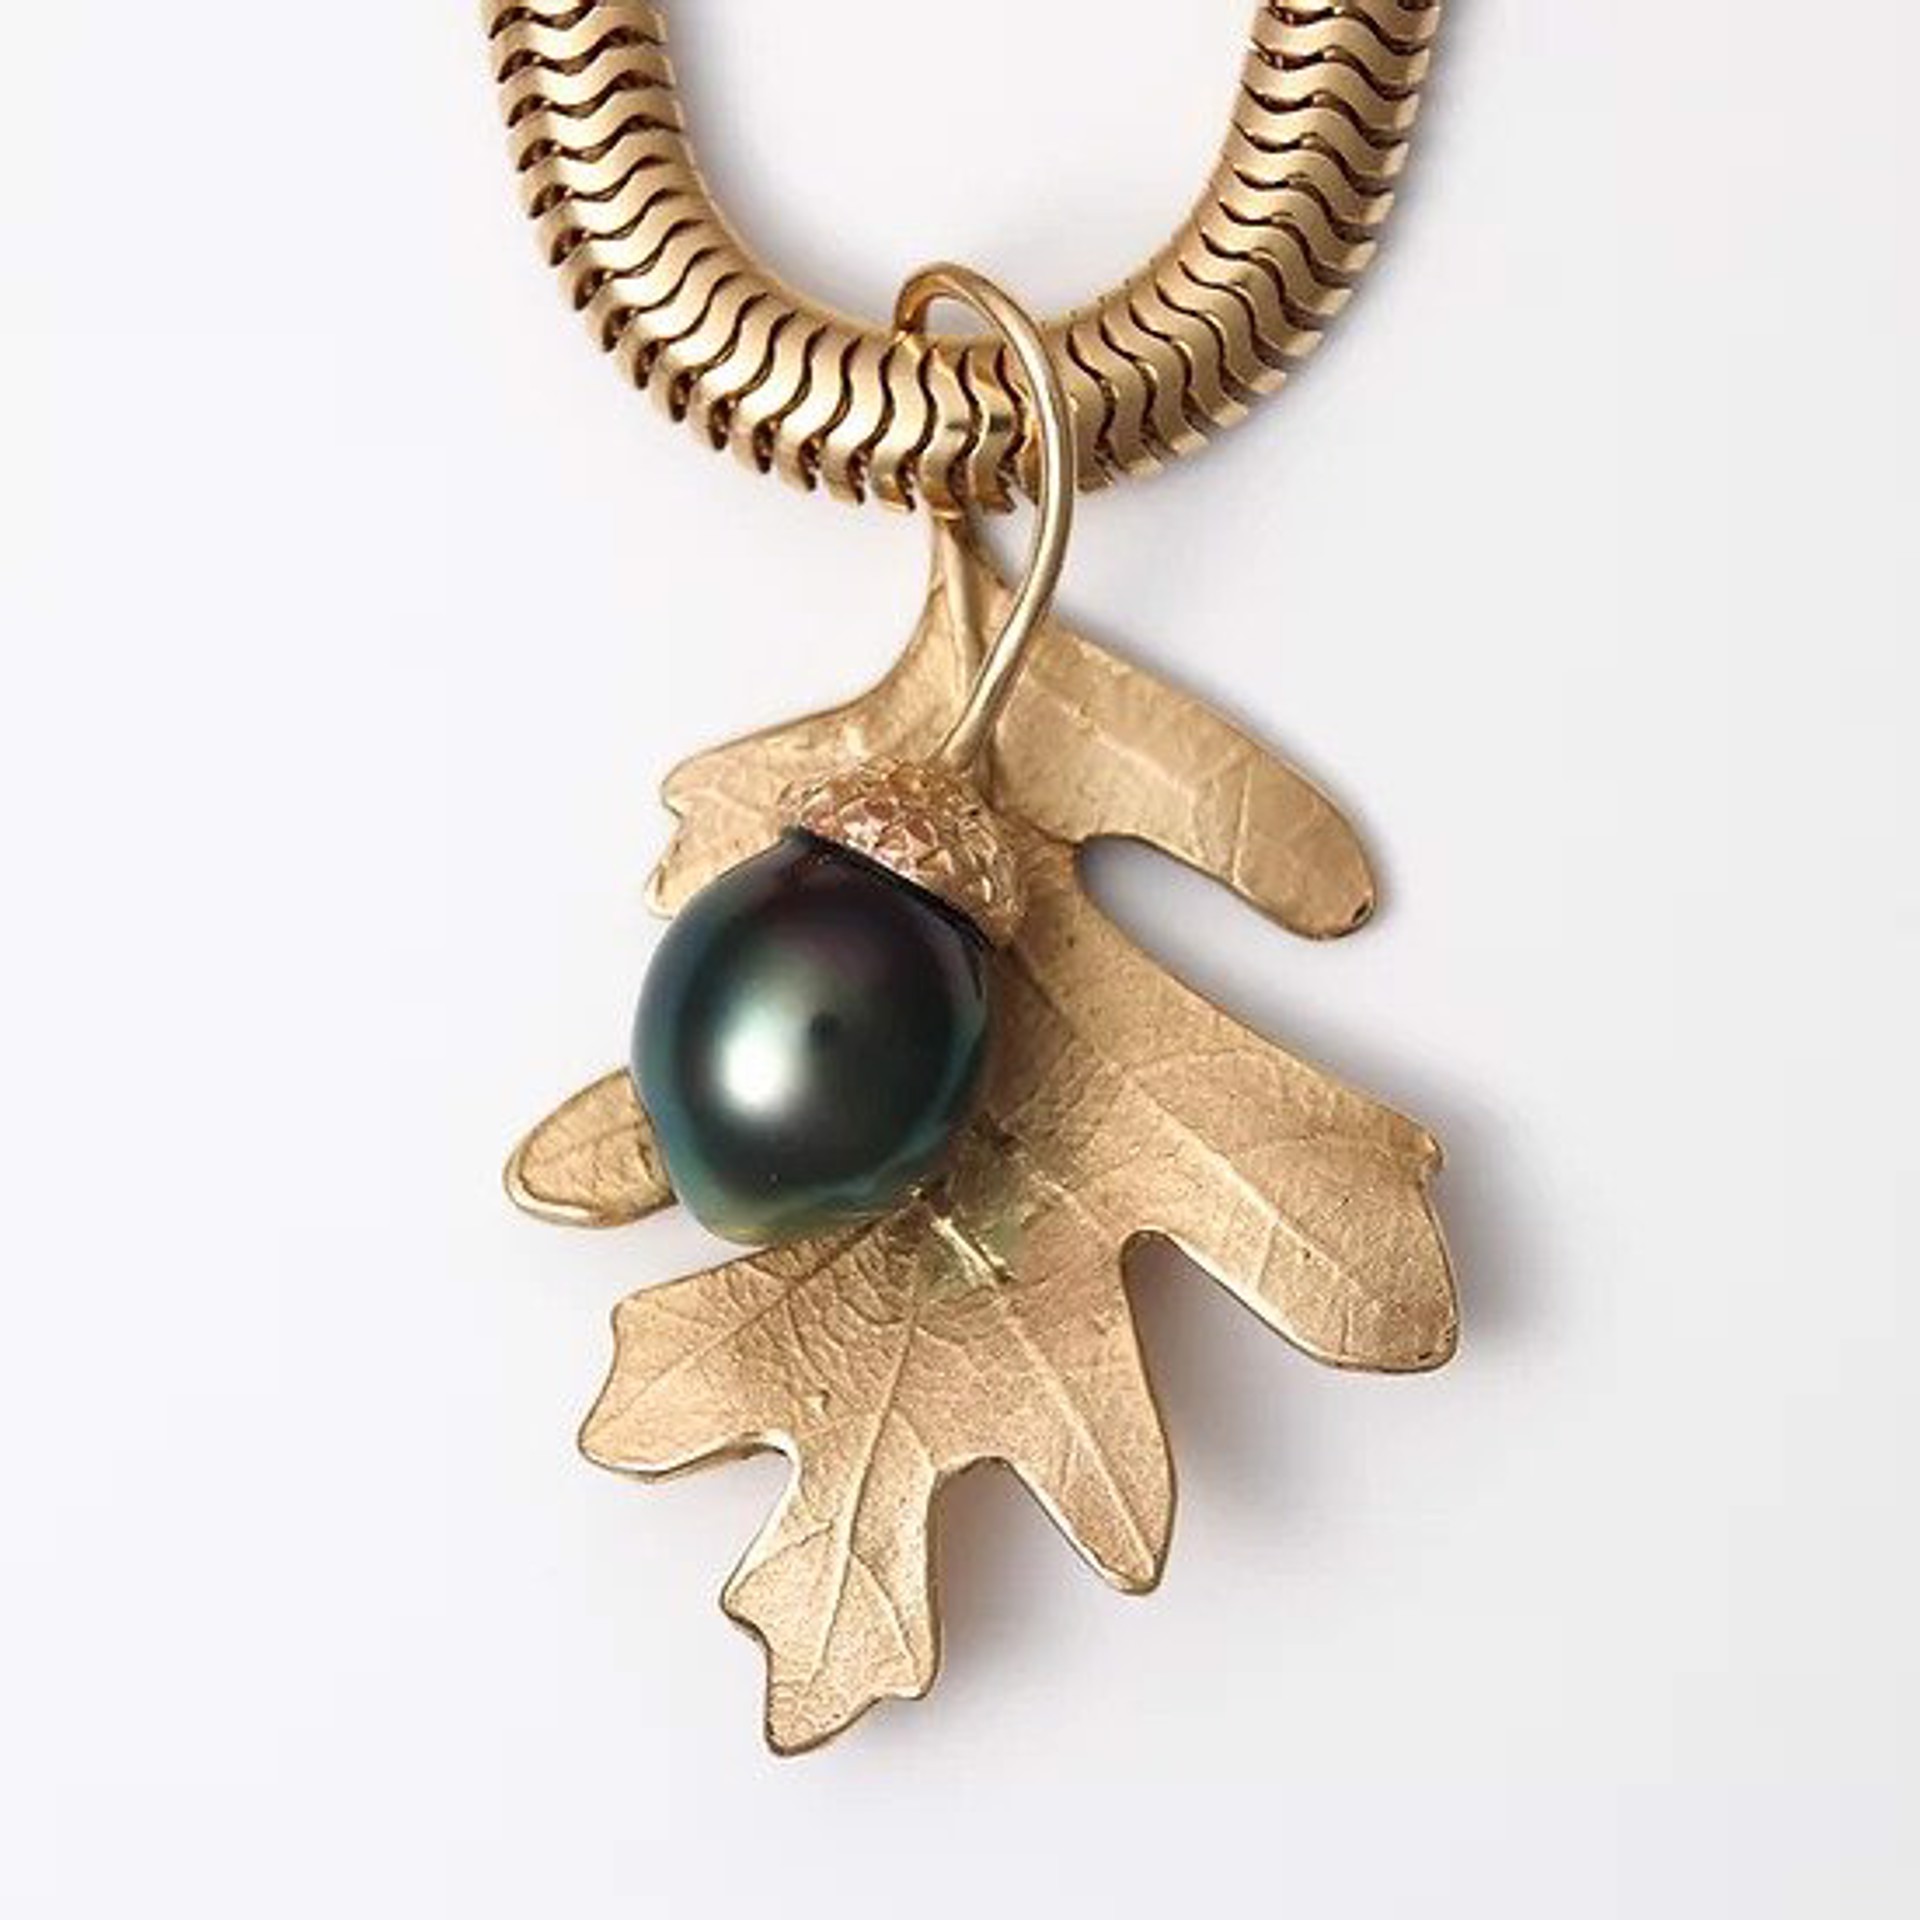 Colorado Oak Leaf with Black Pearl by Sharon Amber